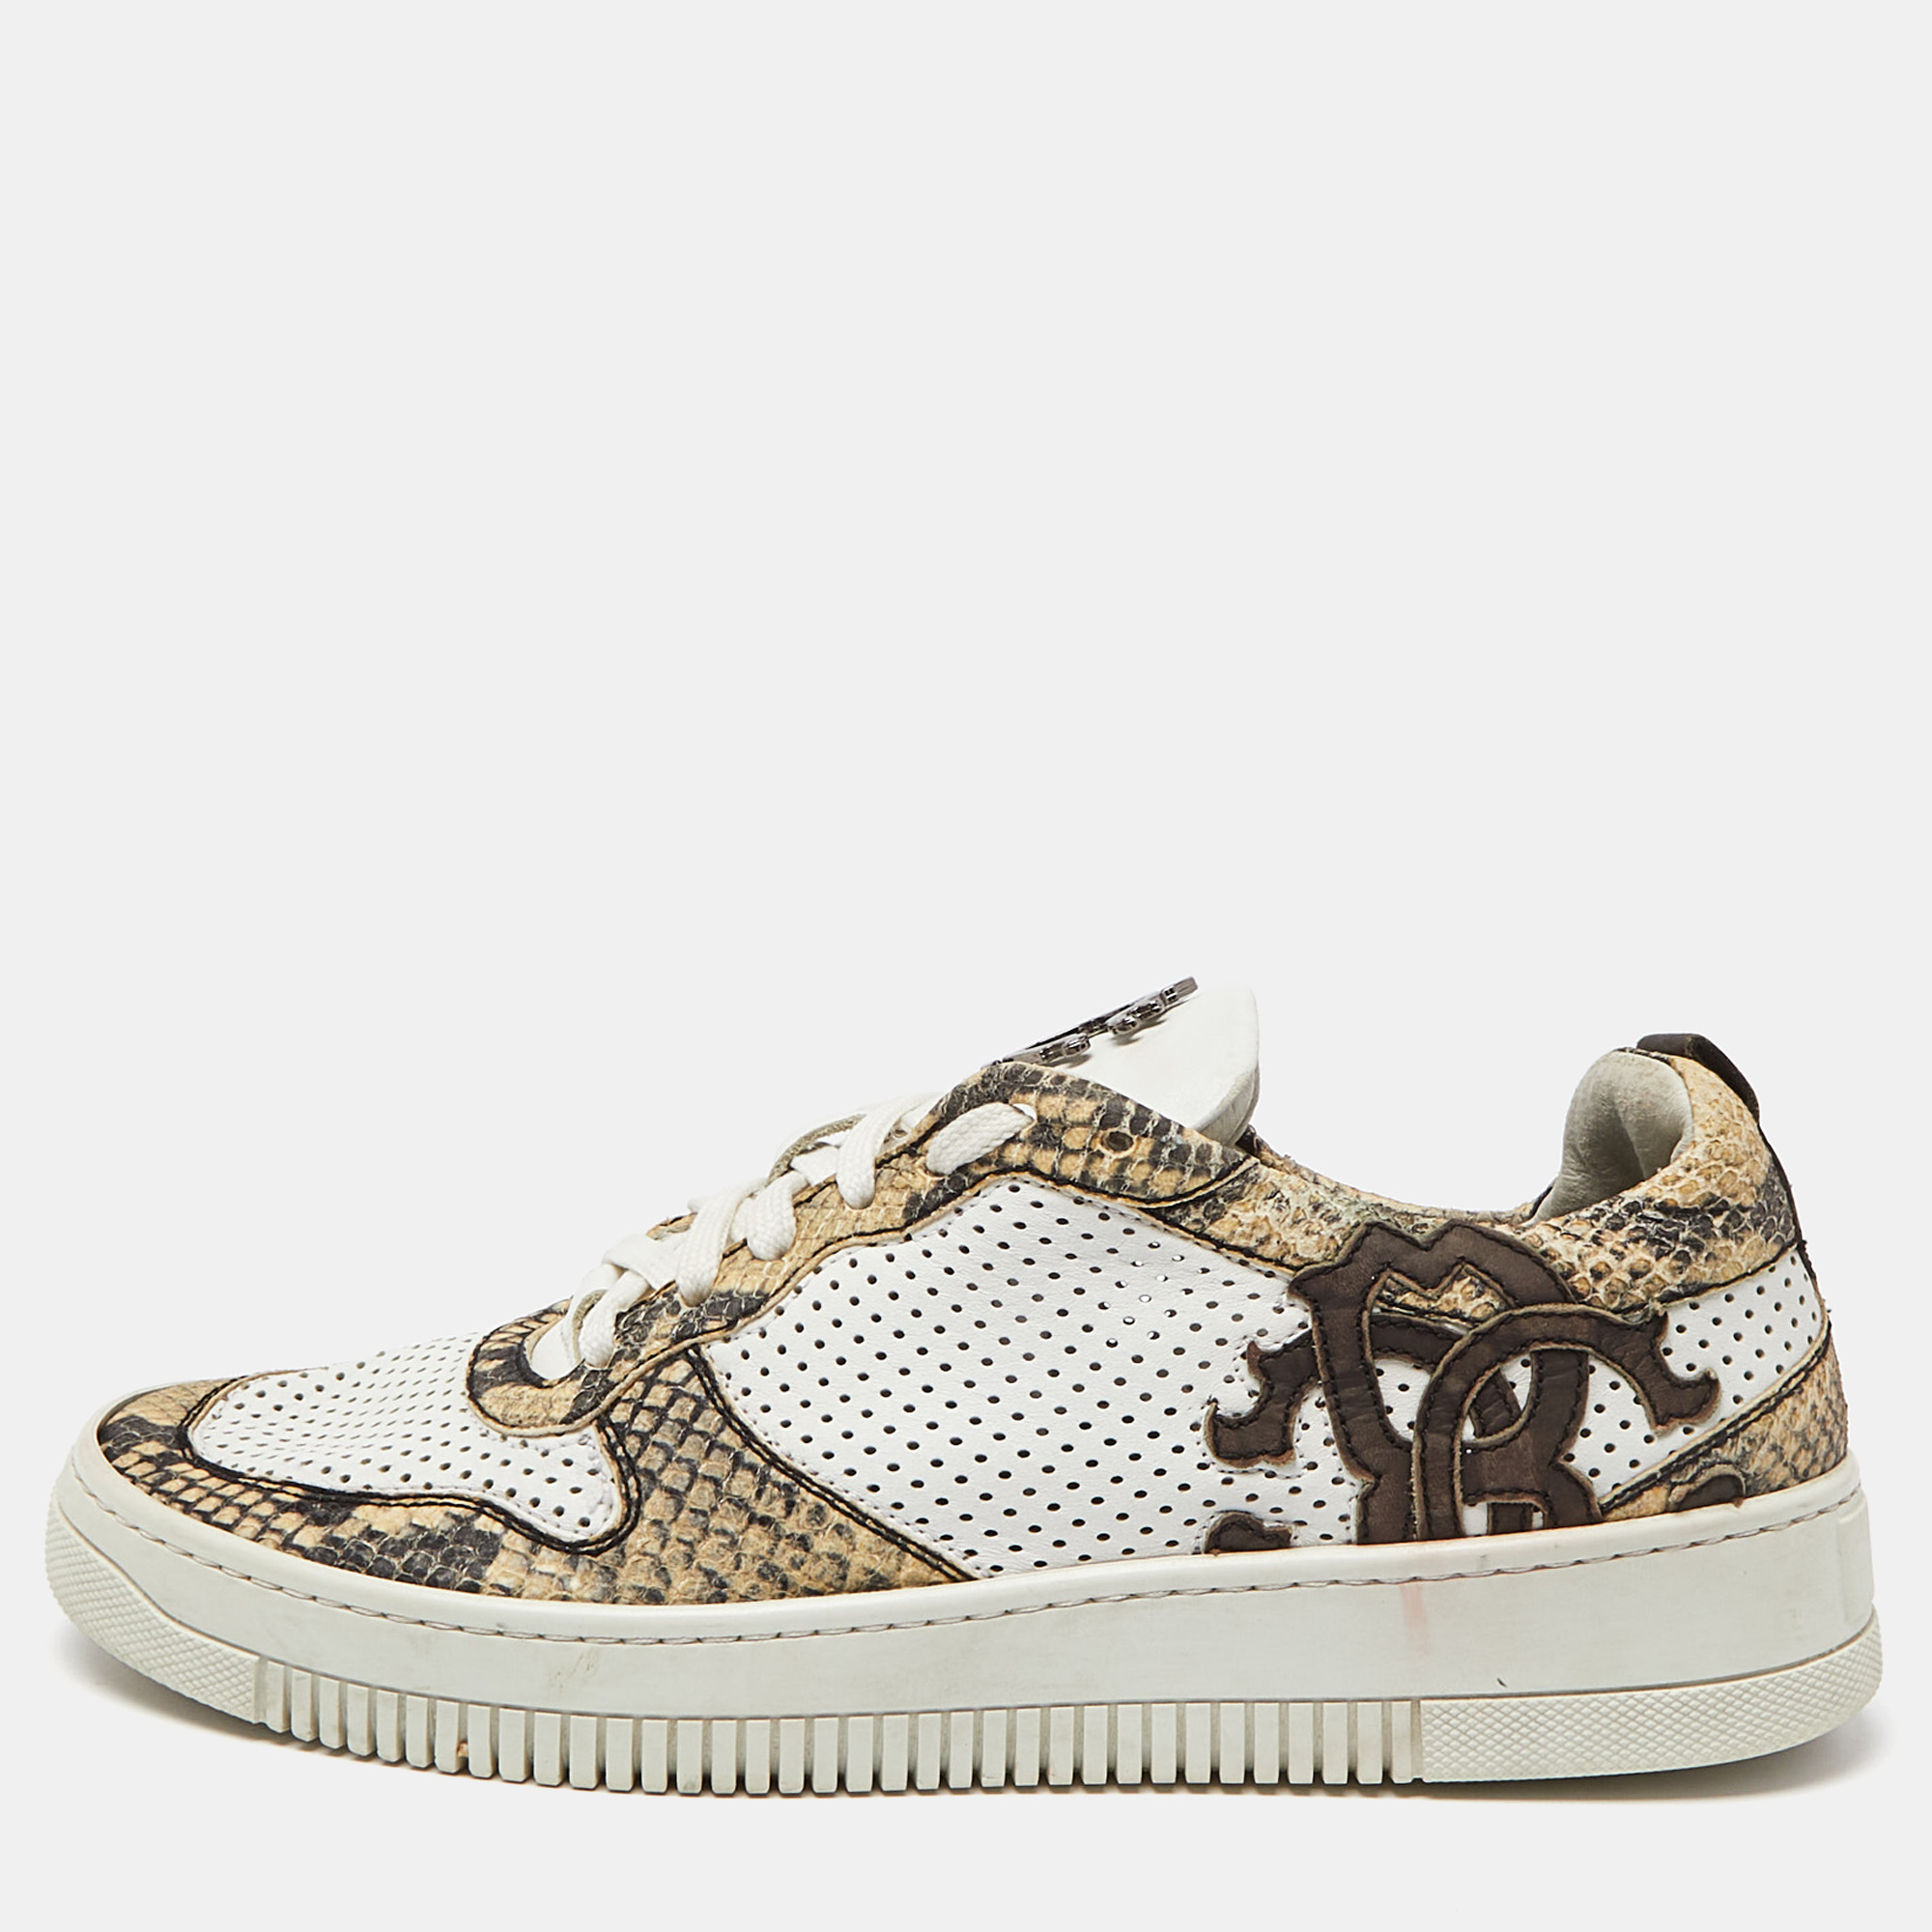 

Roberto Cavalli White/Beige Perforated Python Embossed Leather Low Top Sneakers Size